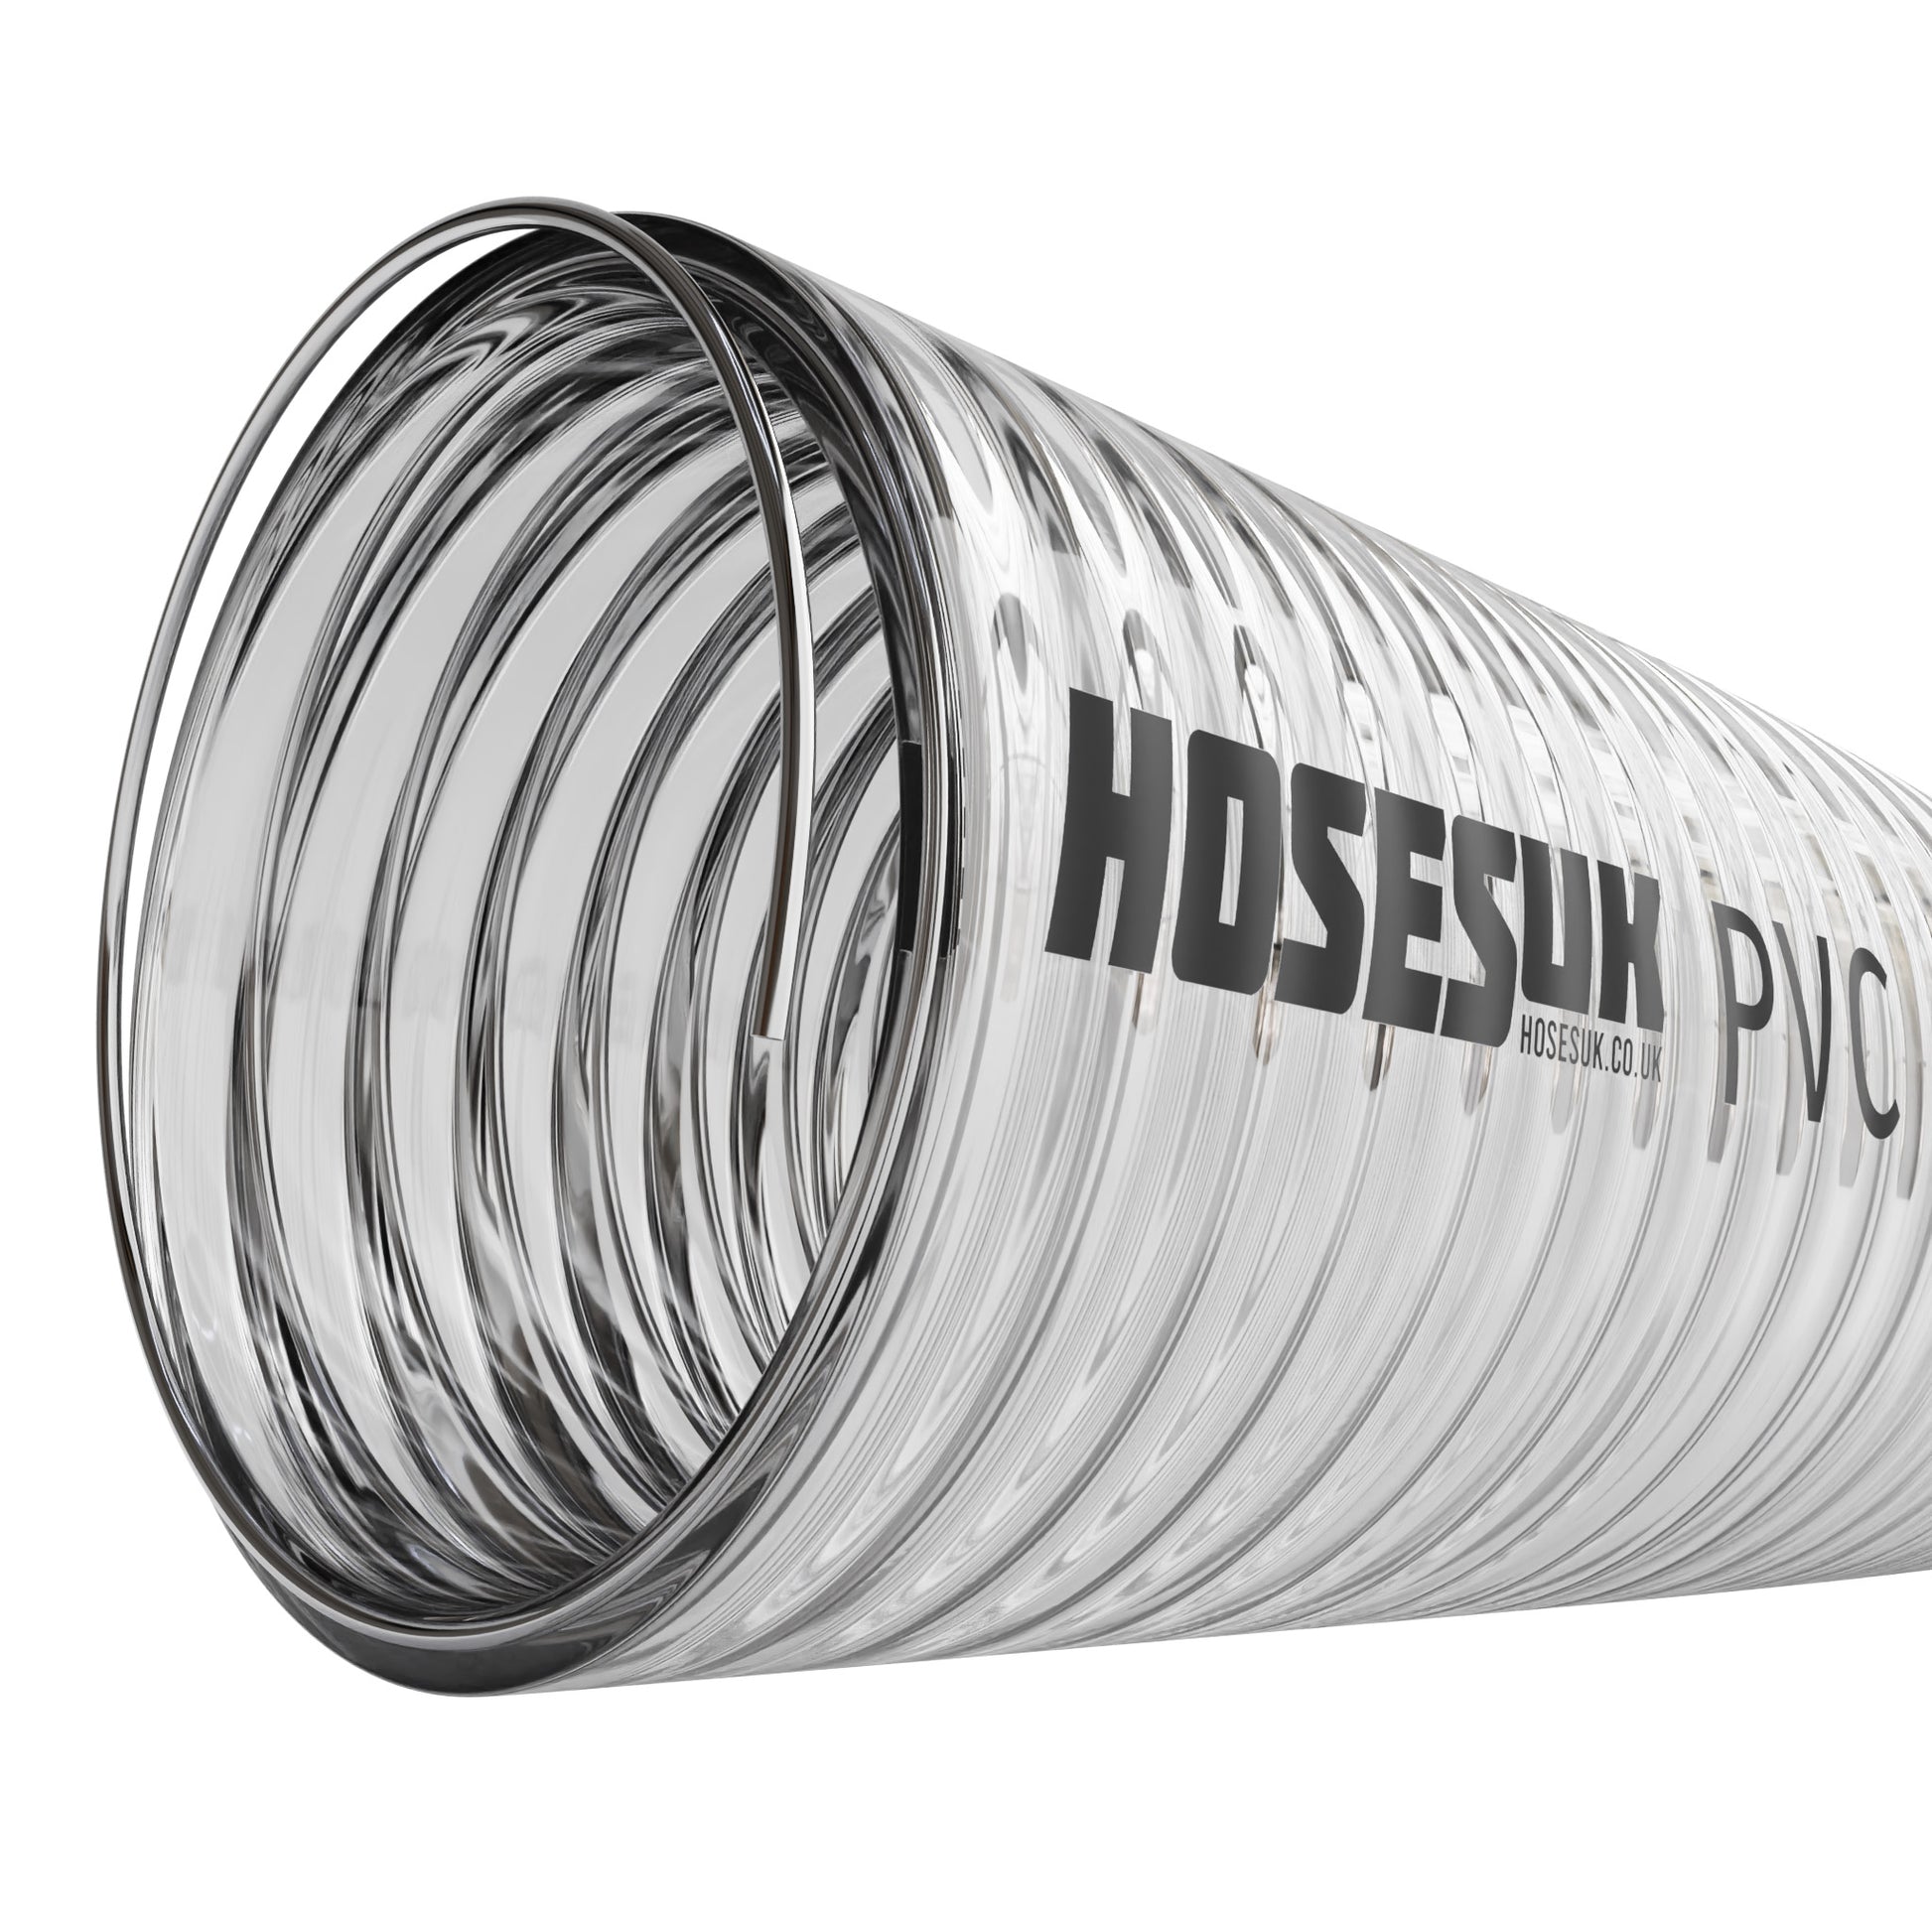 38mm ID PVC Wire Reinforced Clear Hose  Hoses UK   